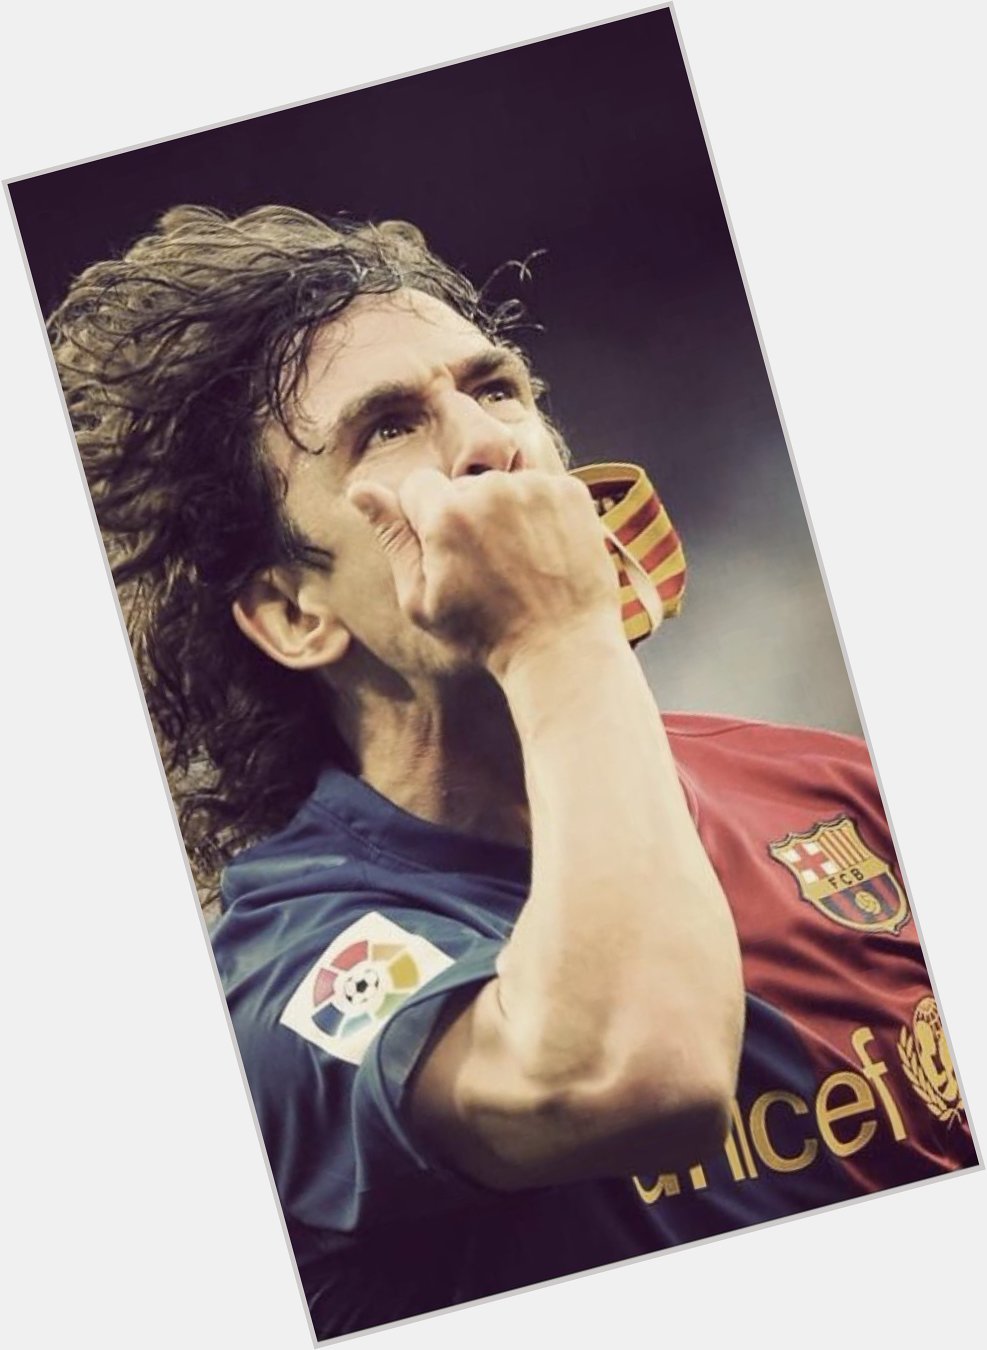    Happy birthday to one of the biggest Barça legends! Mr. Carles Puyol! 